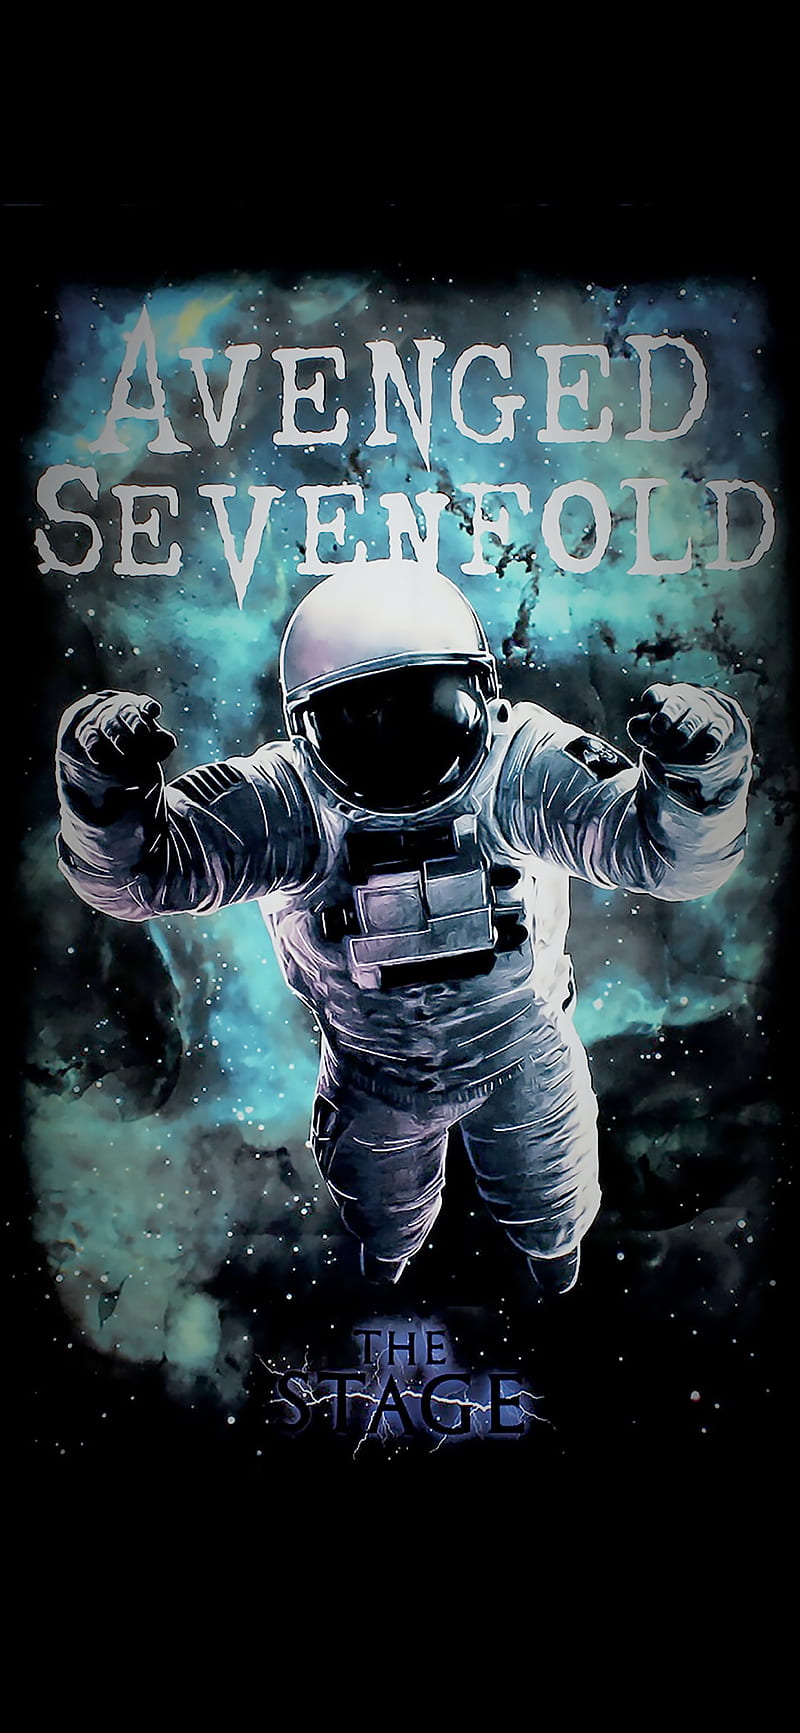 avenged sevenfold, a7x, astronaut, cd cover, space, the stage, HD phone wallpaper